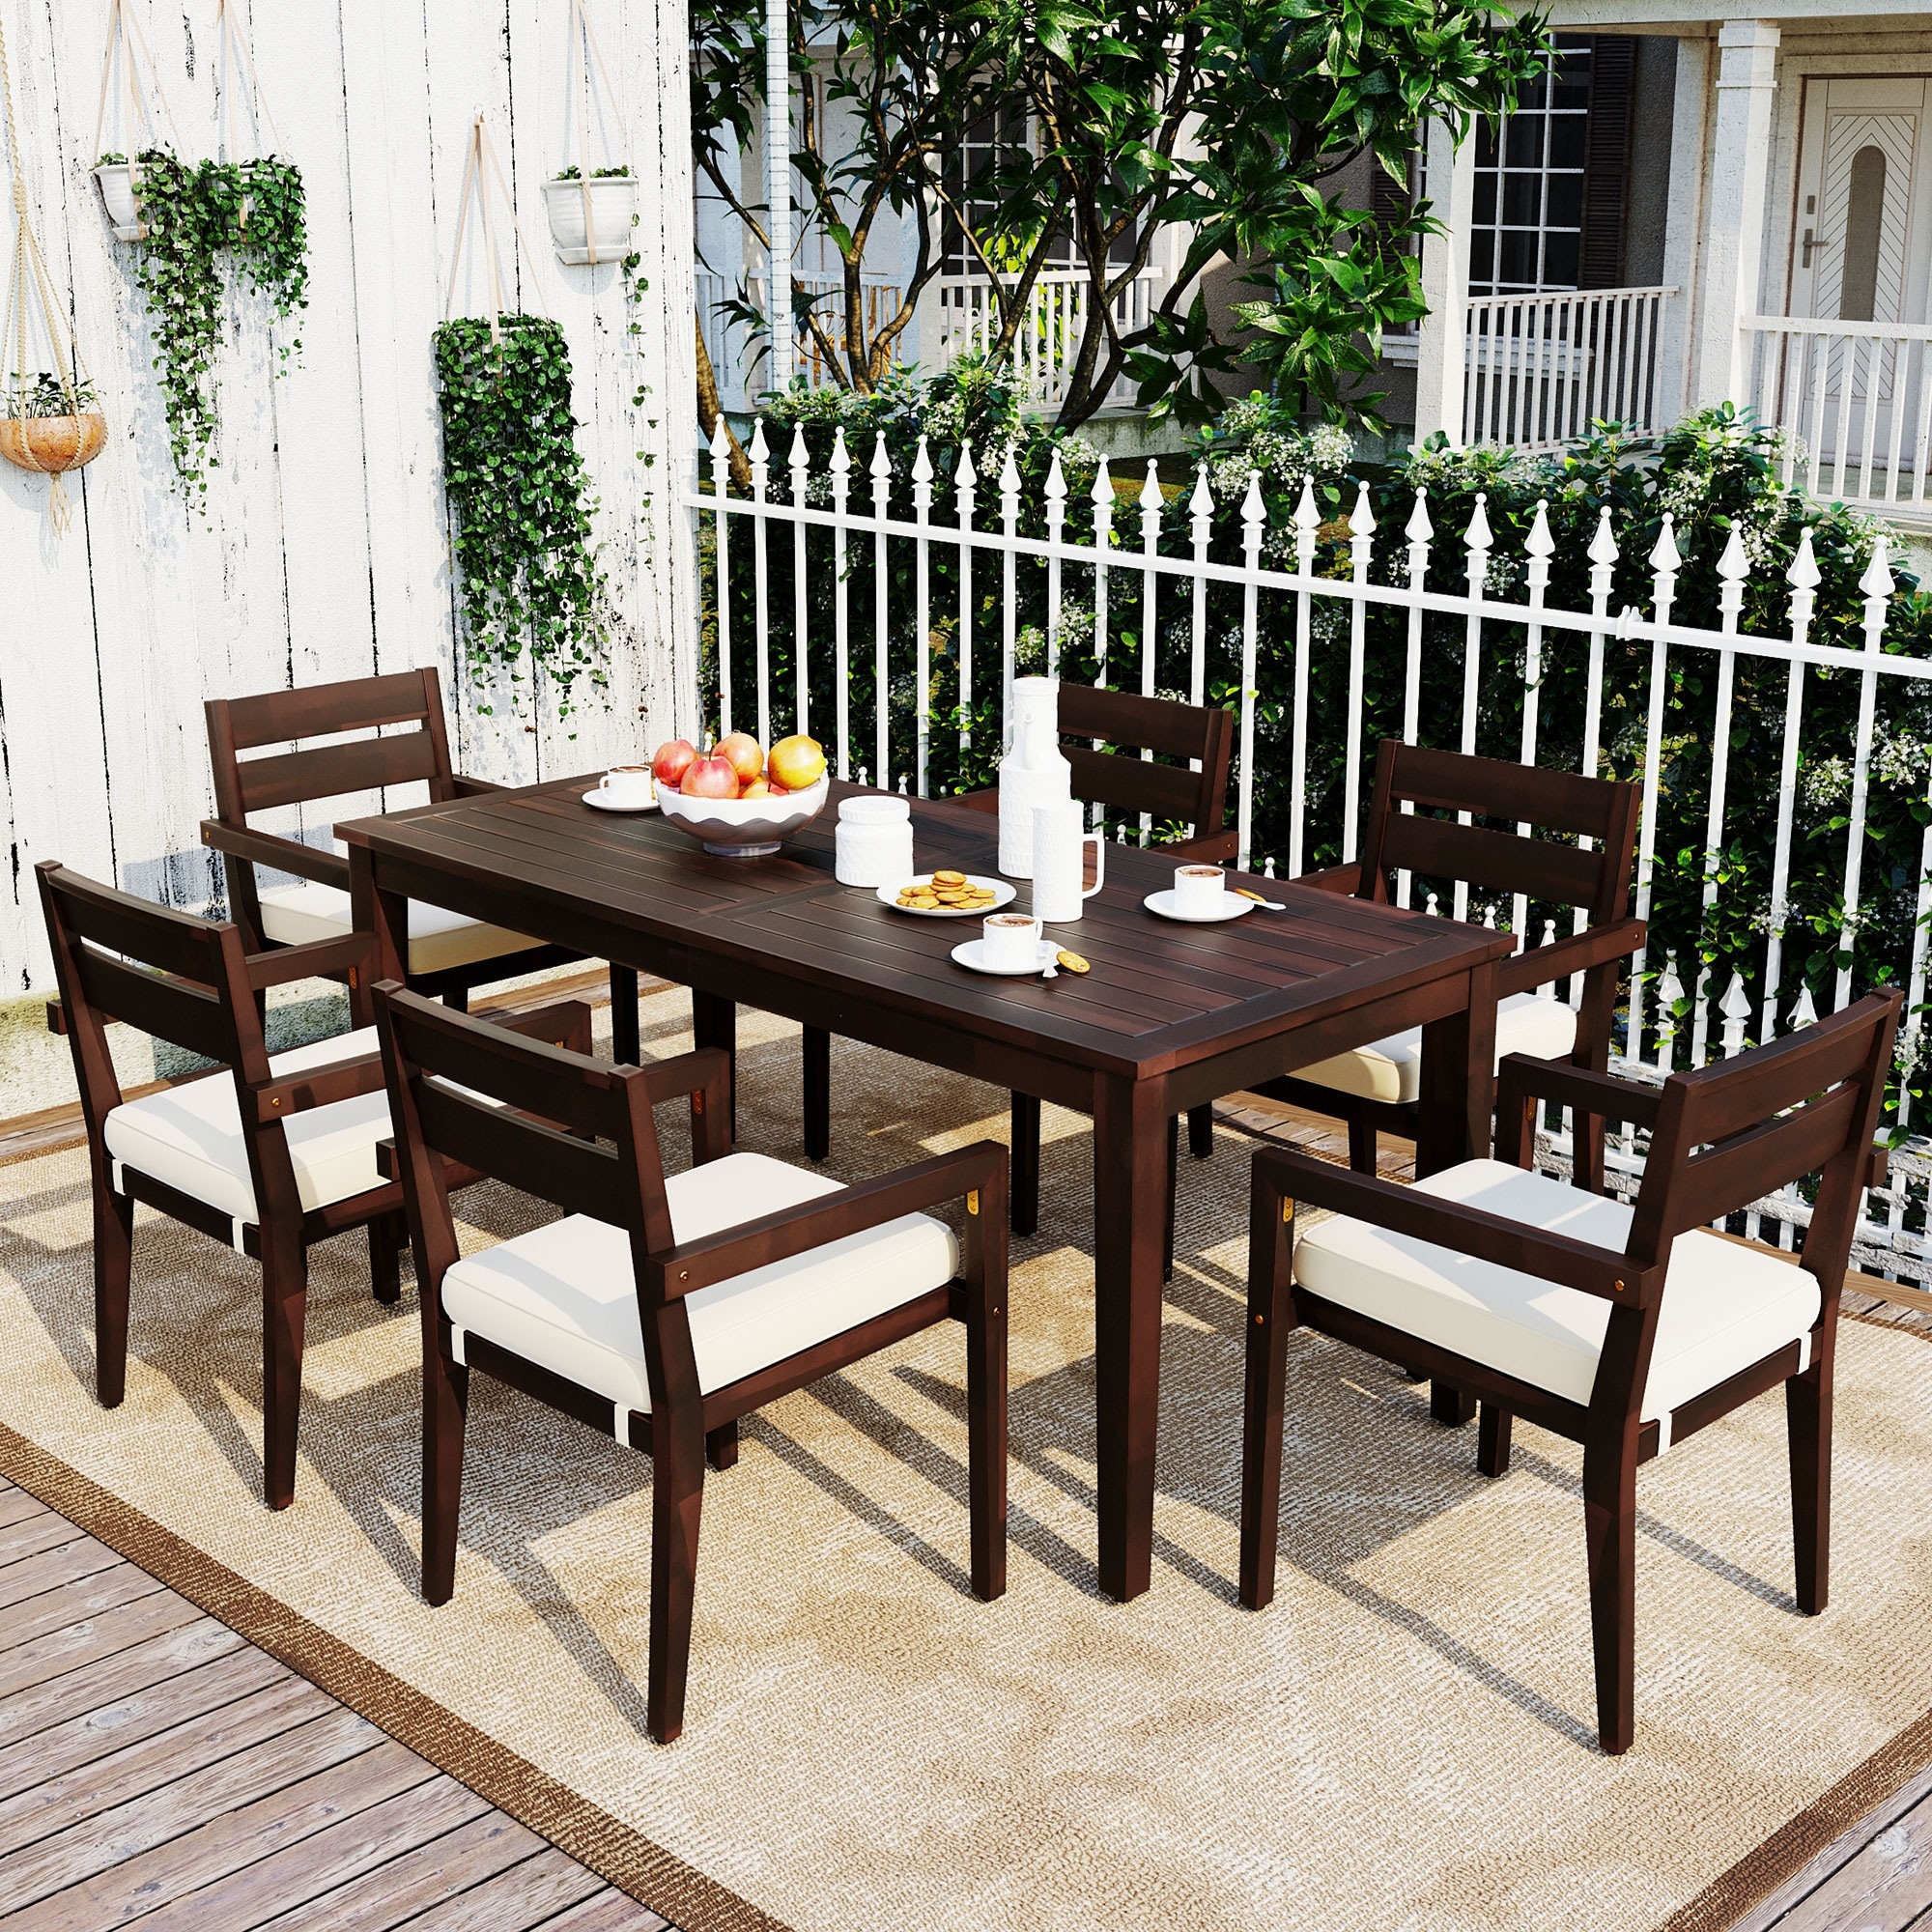 7 Piece Acacia Wood Outdoor Dining Set Suitable For Patio Or Backyard